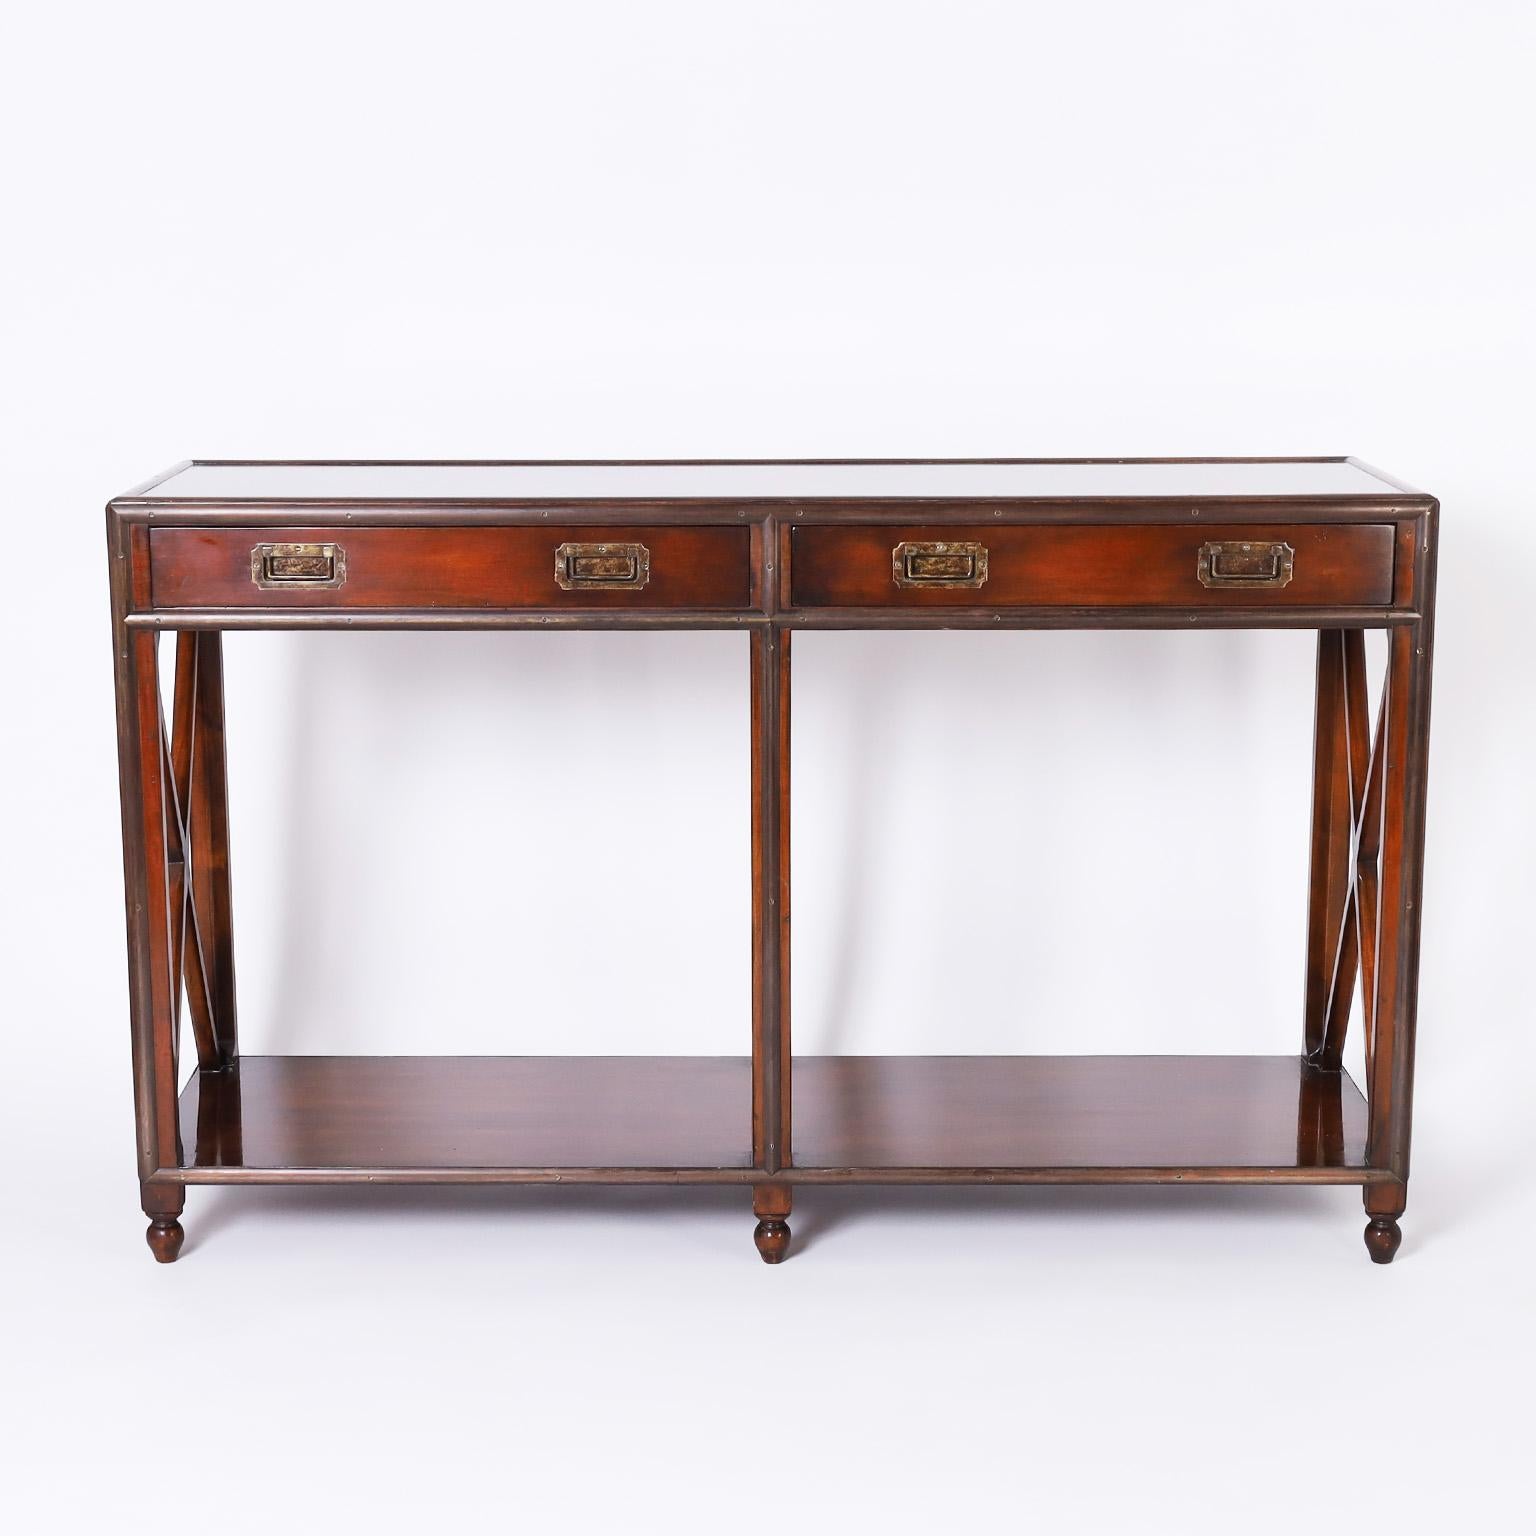 Dashing mid-century two tiered console crafted in mahogany in an unusual form with influences from neoclassic and British colonial. The brass campaign style hardware has a bronze like patina and the piece sits on six turned feet. Attributed to